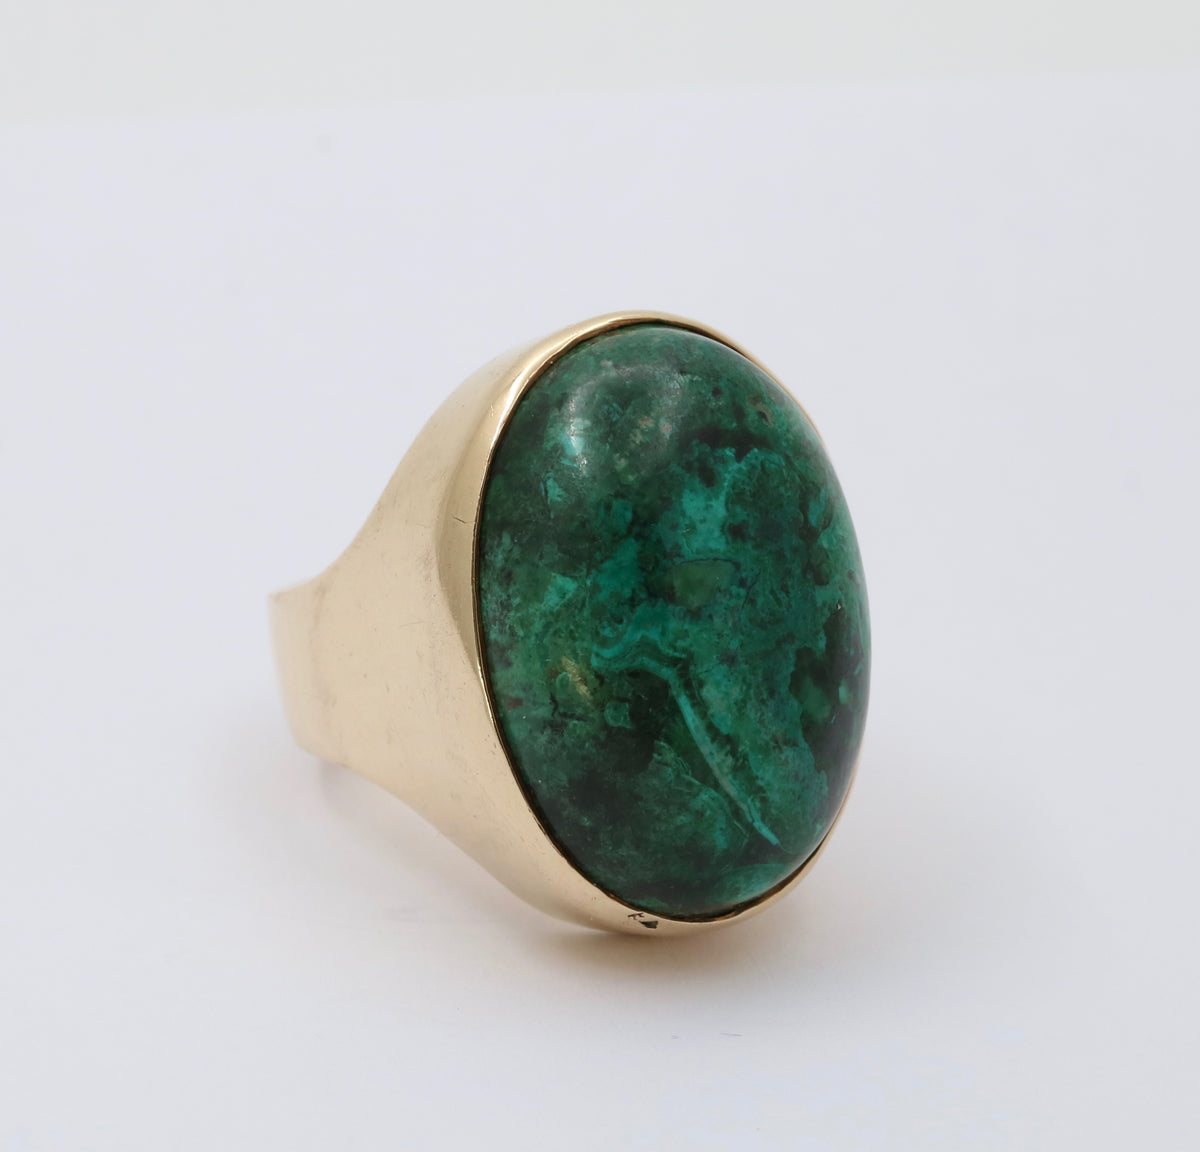 Large Vintage 14K Gold and Chrysocolla Signet Style Ring, 26.5 Grams